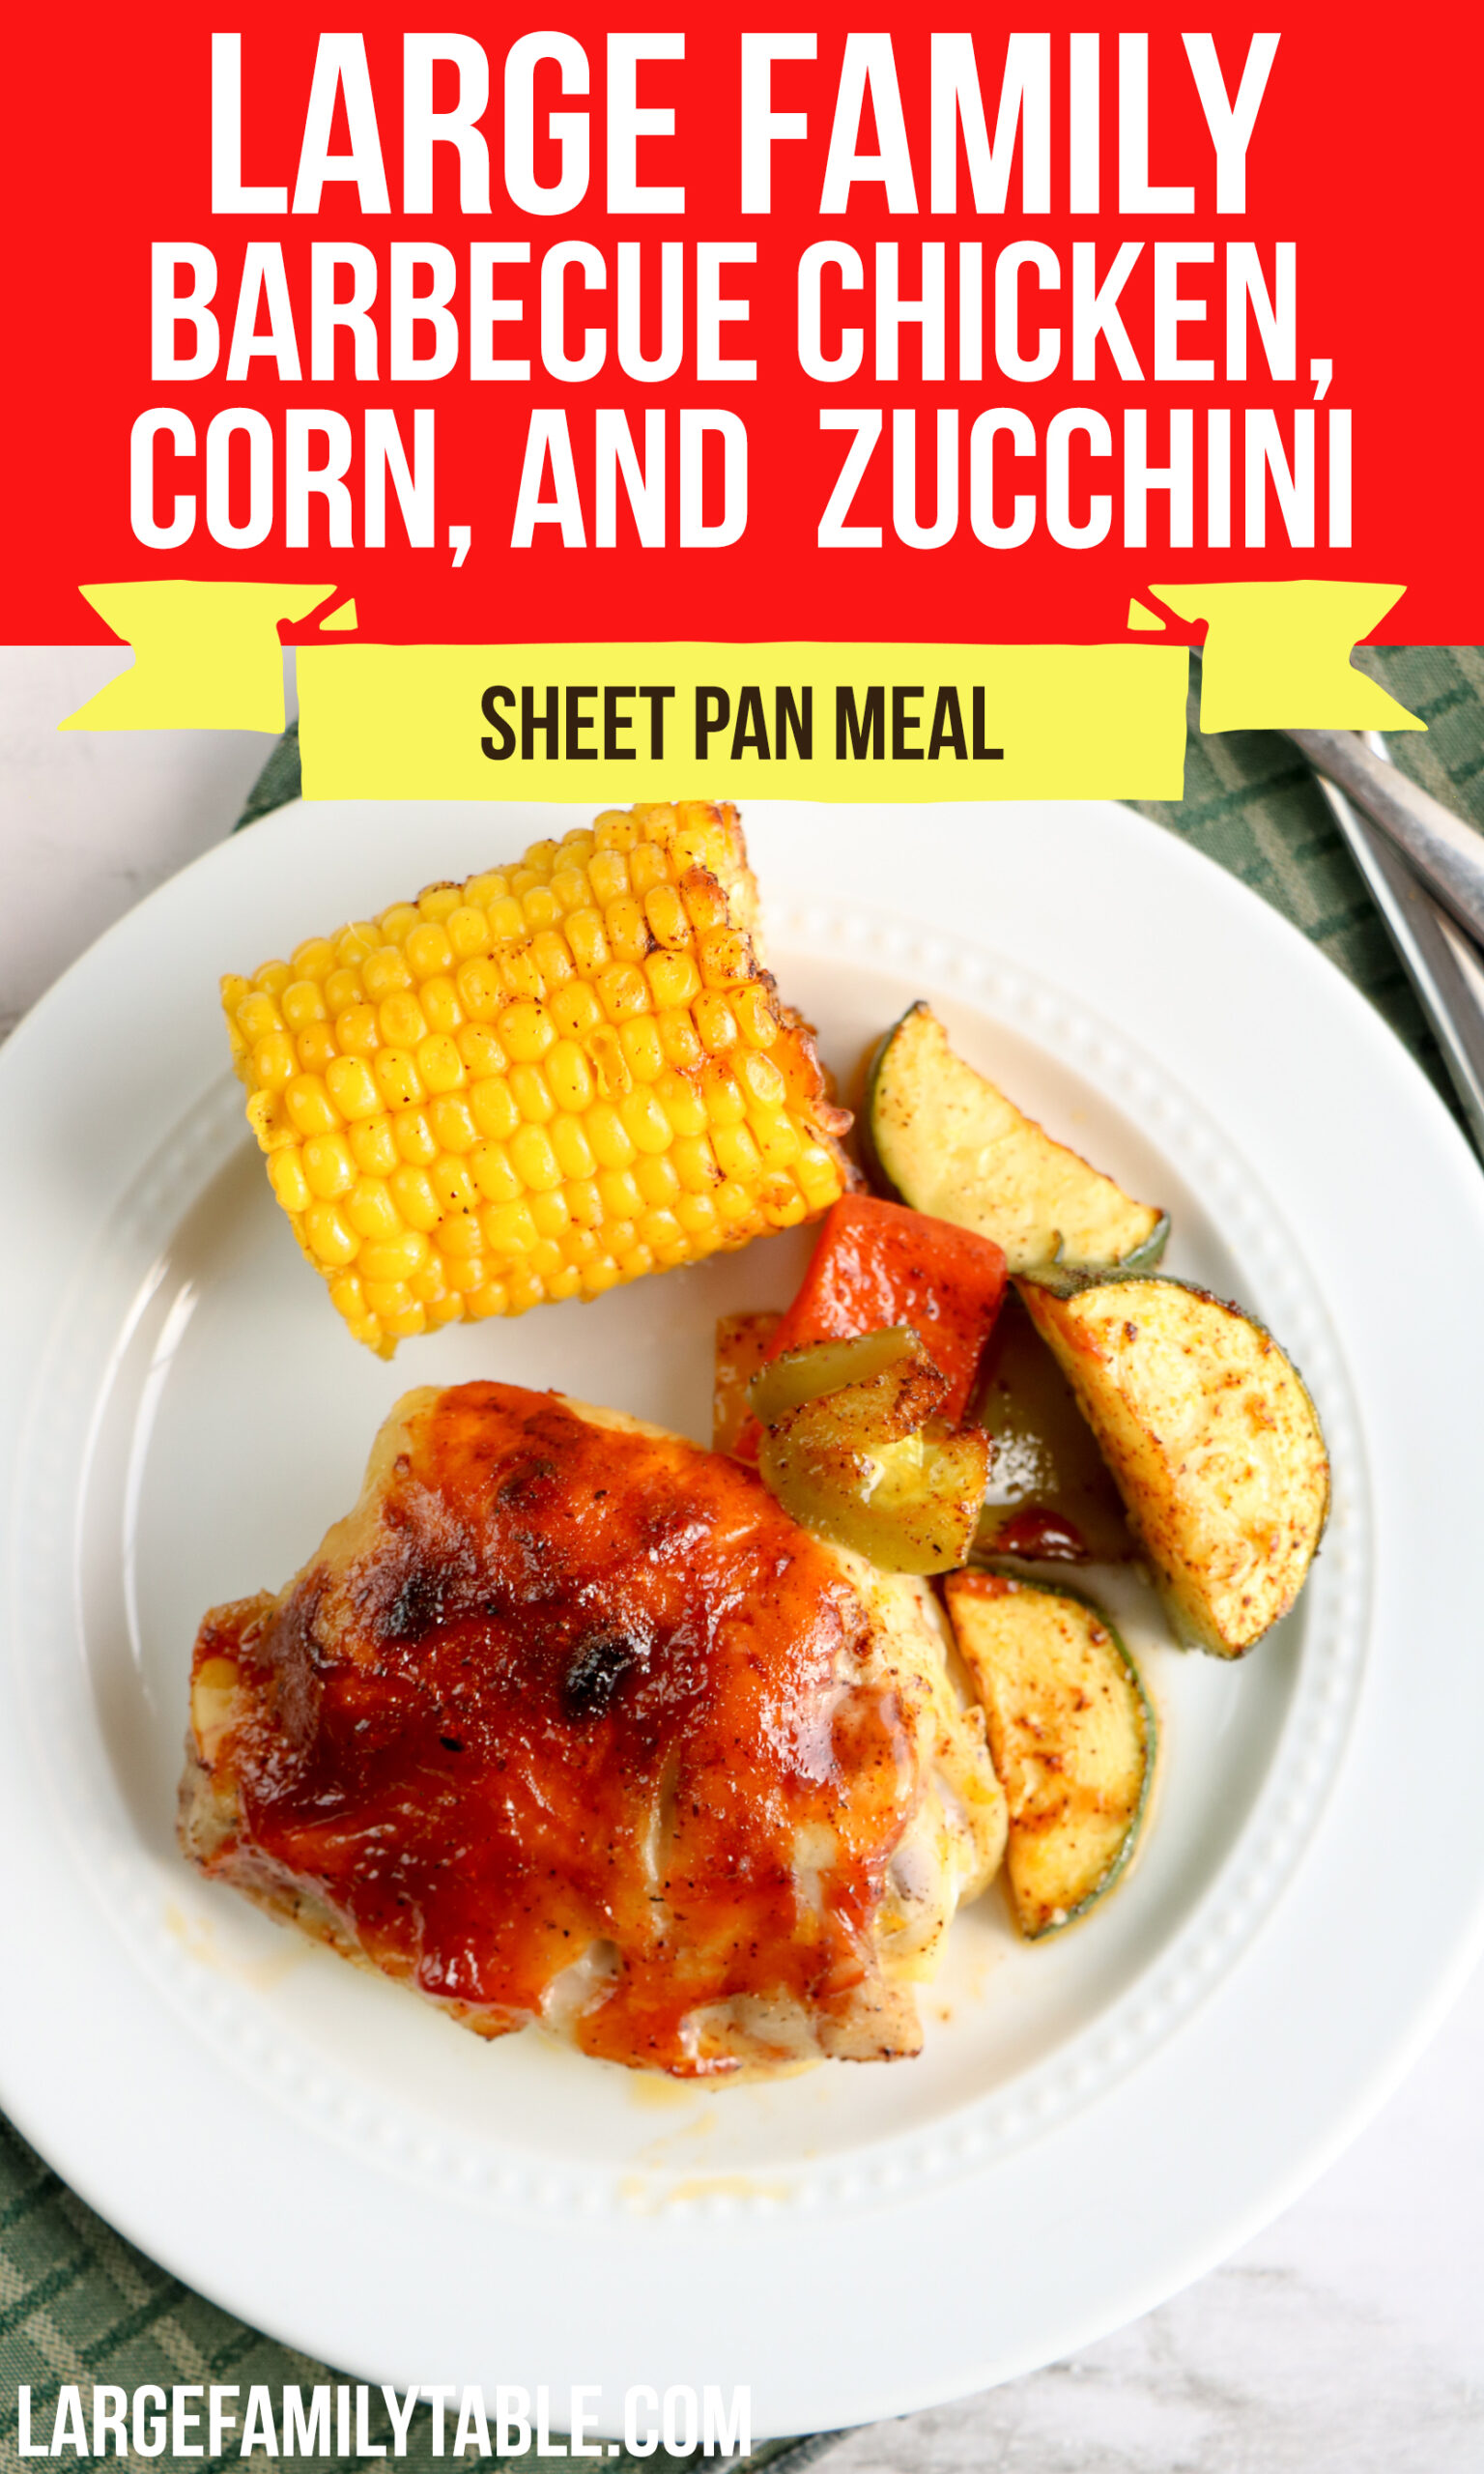 Large Family Barbecue Chicken Corn and Zucchini Sheet Pan